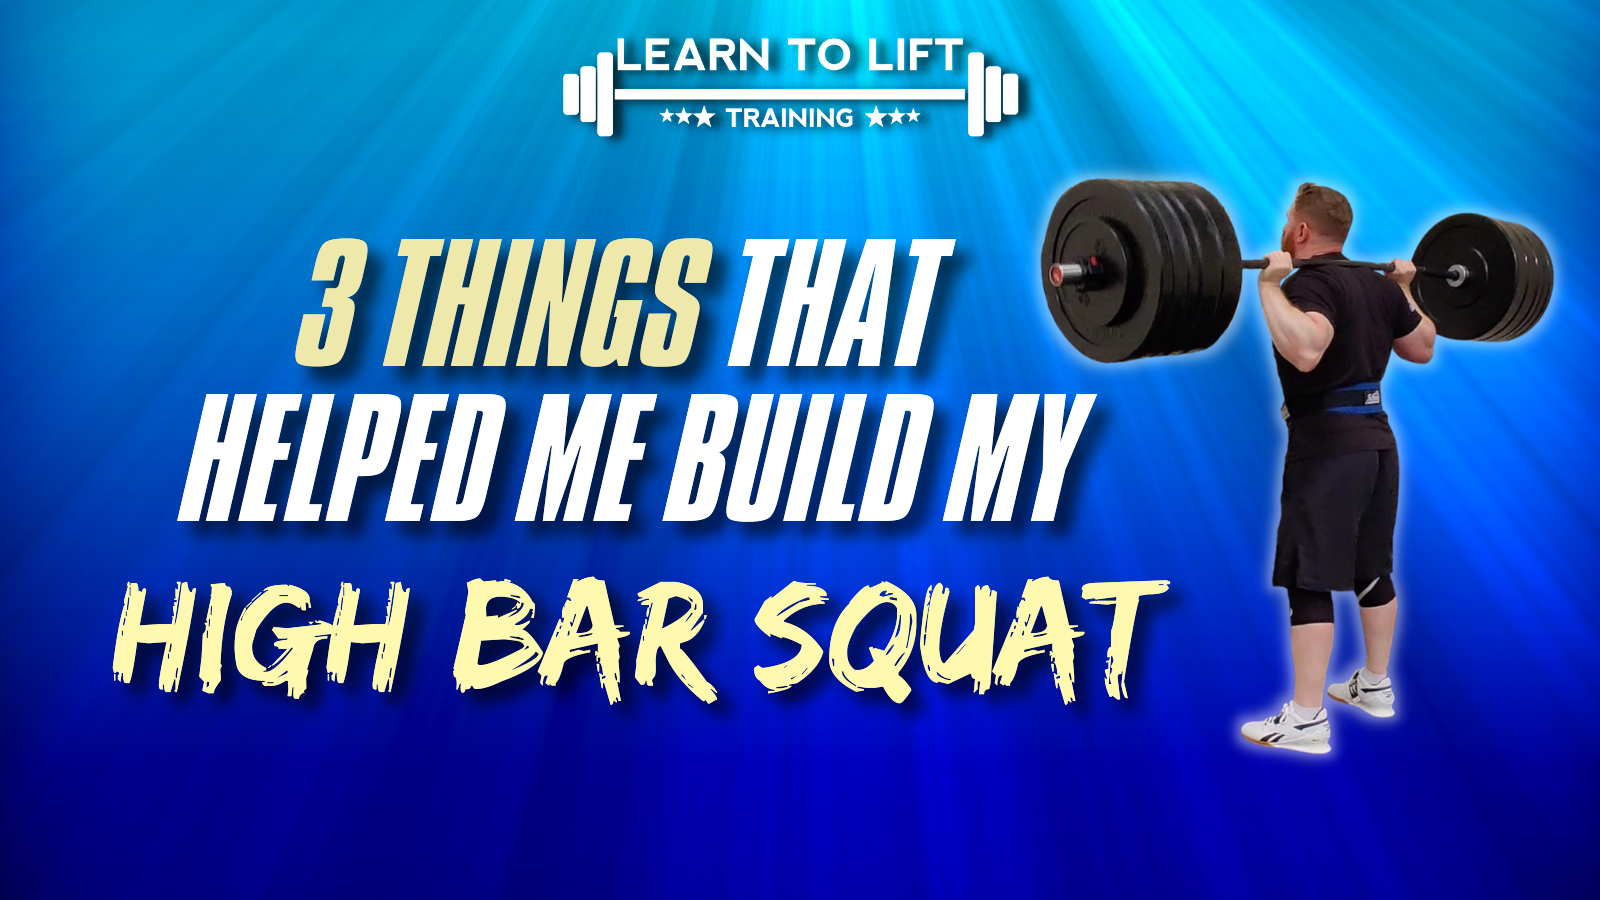 Personal Trainer Glasgow - 3 Things That Helped Me Build My High Bar Squat